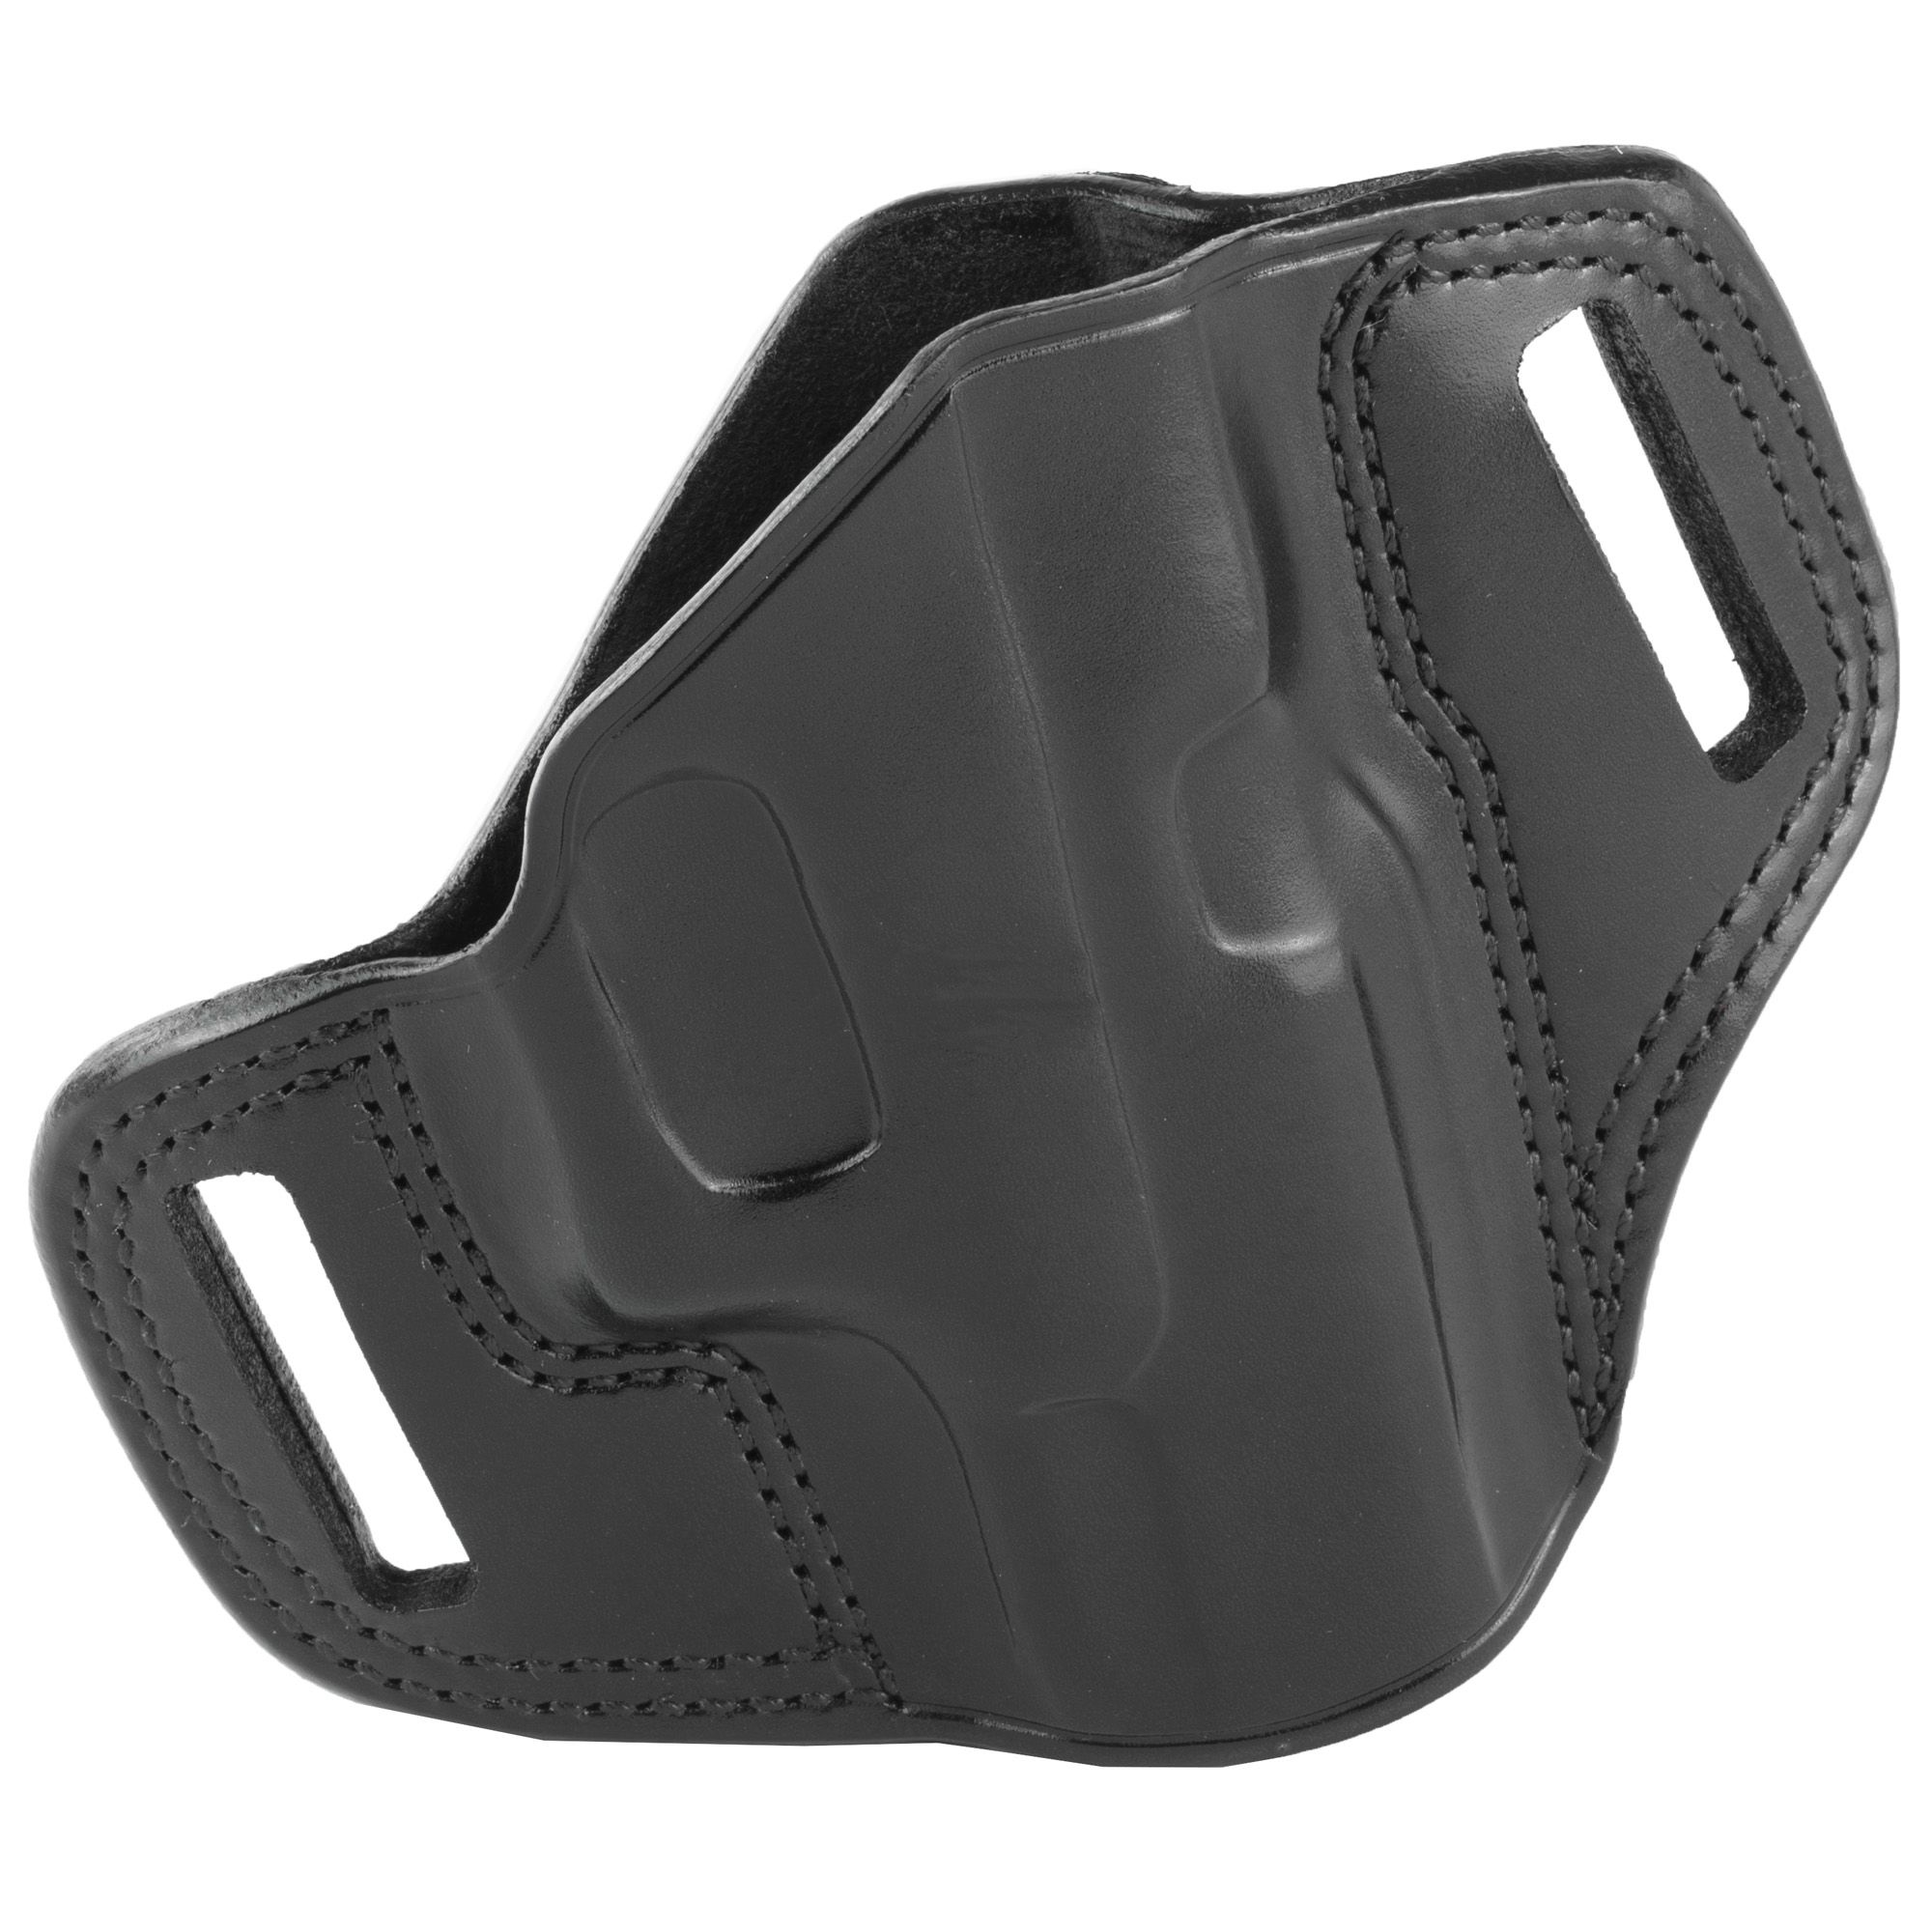 Galco Combat Master Concealment Holster - Right Hand Black Glock 19/23: CM226B